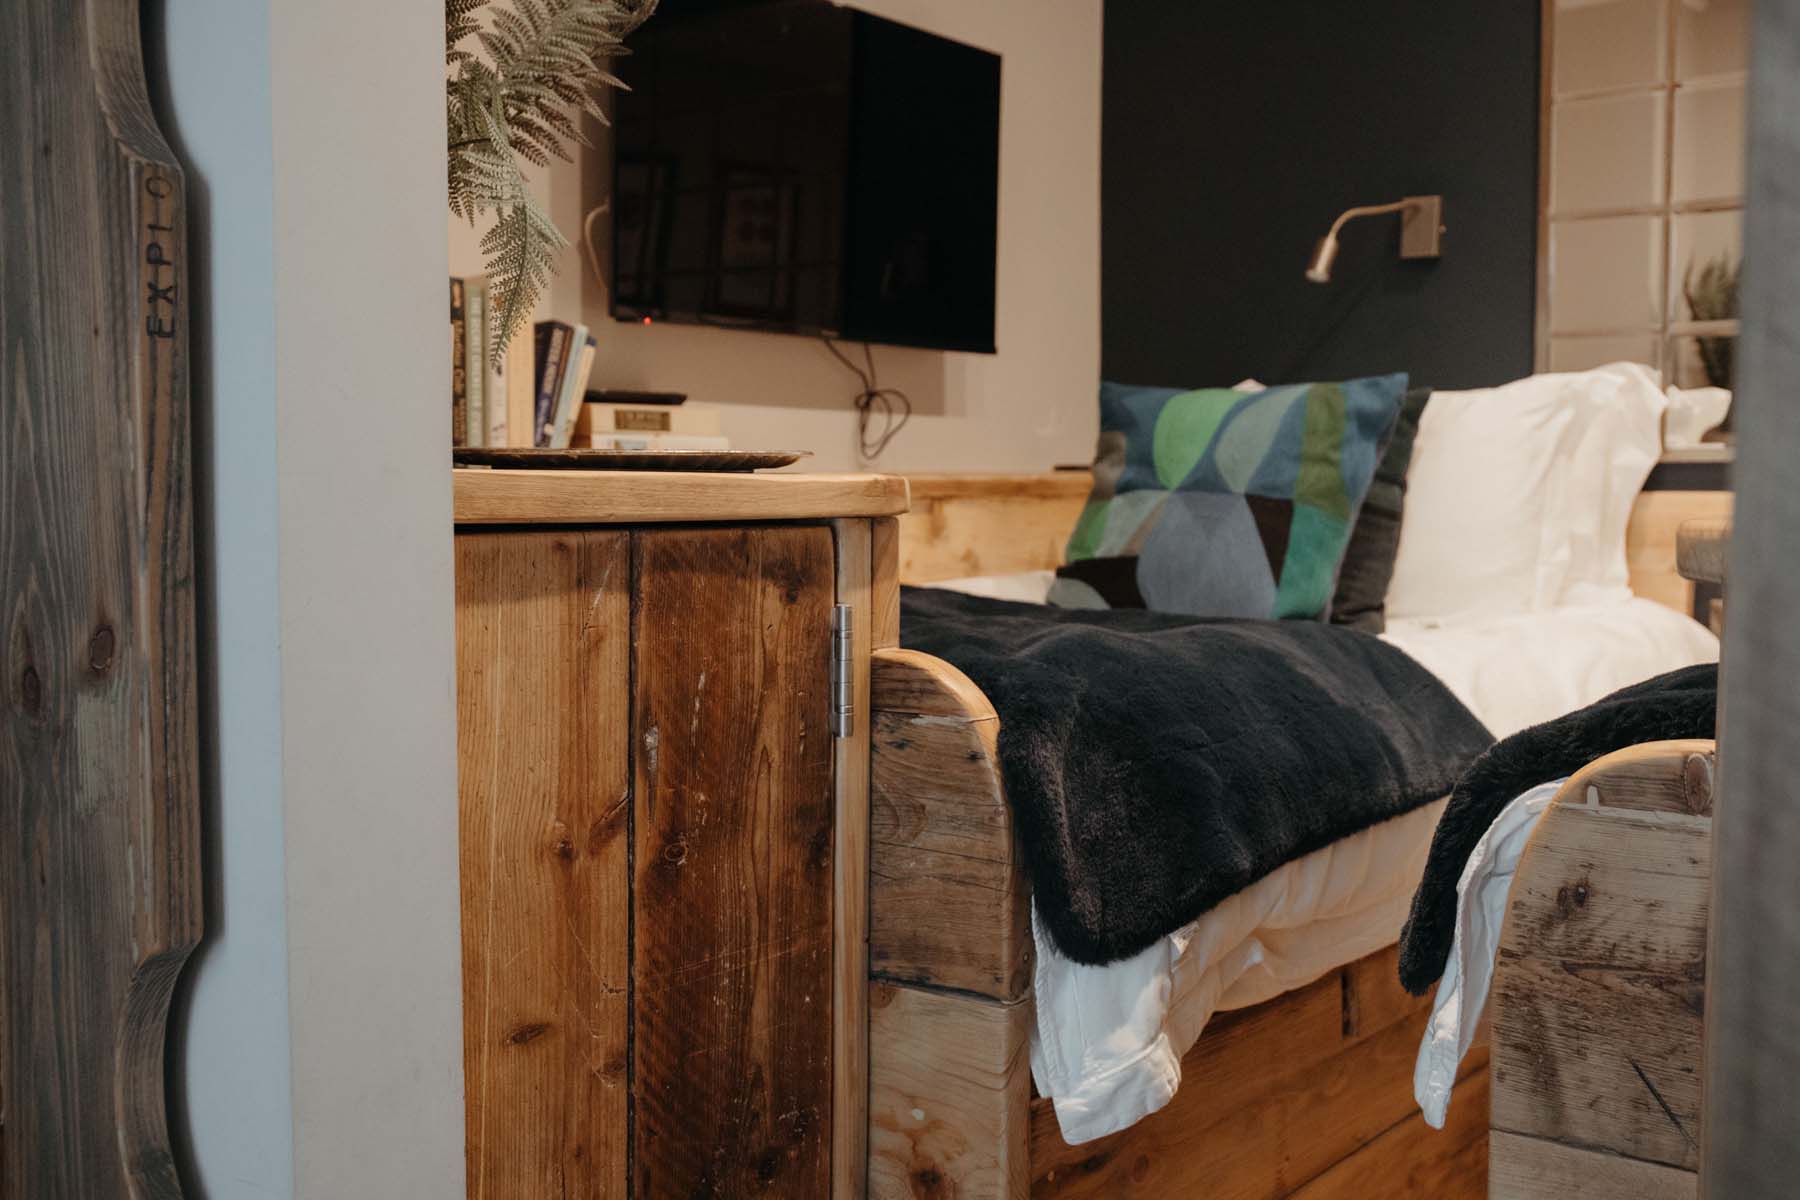 Single kids bed in made of wood